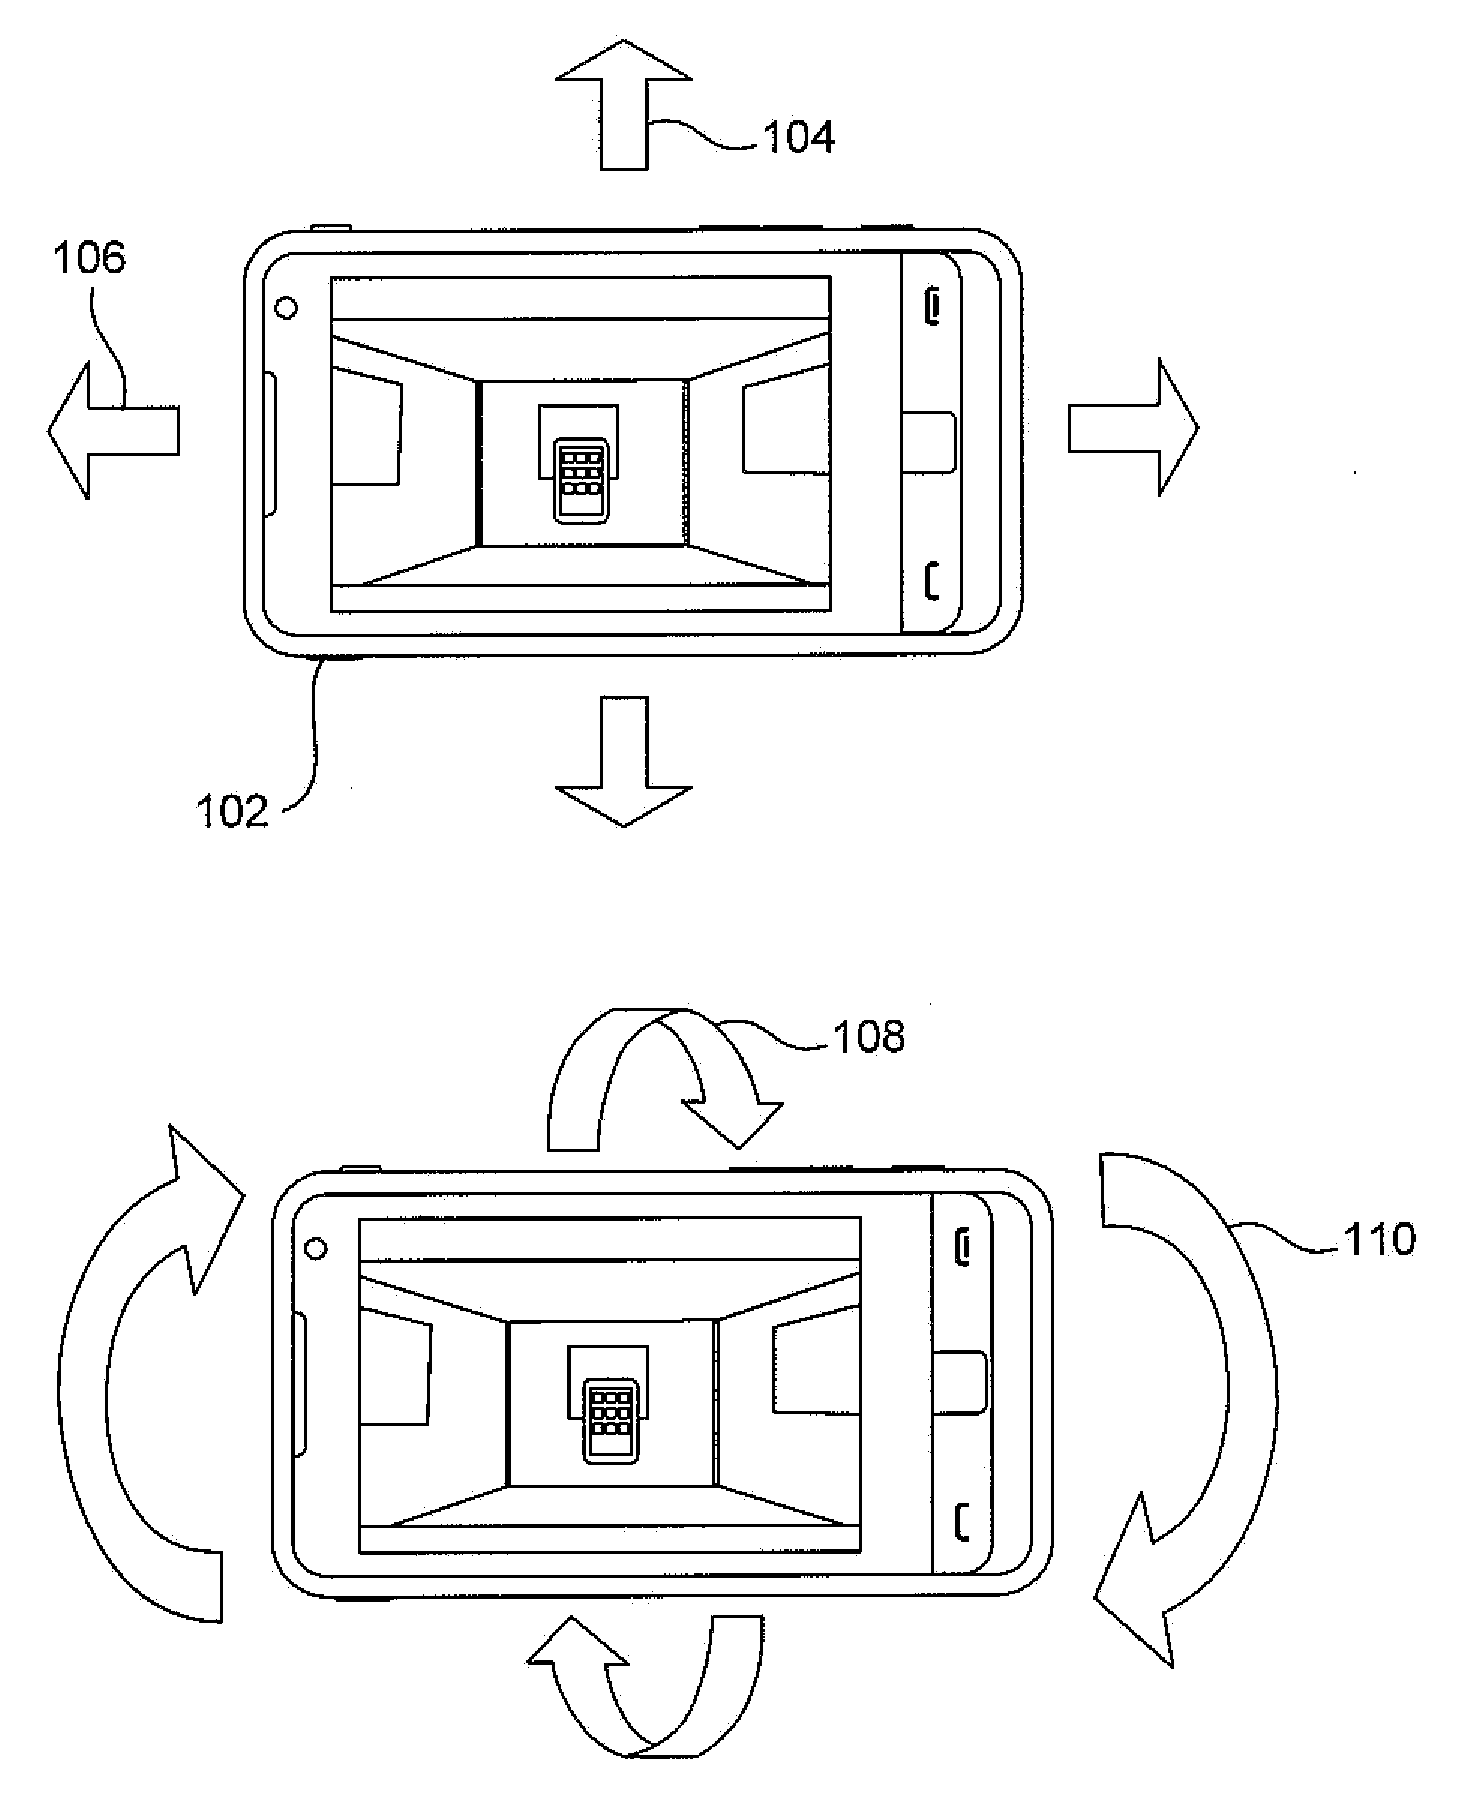 Detecting ego-motion on a mobile device displaying three-dimensional content